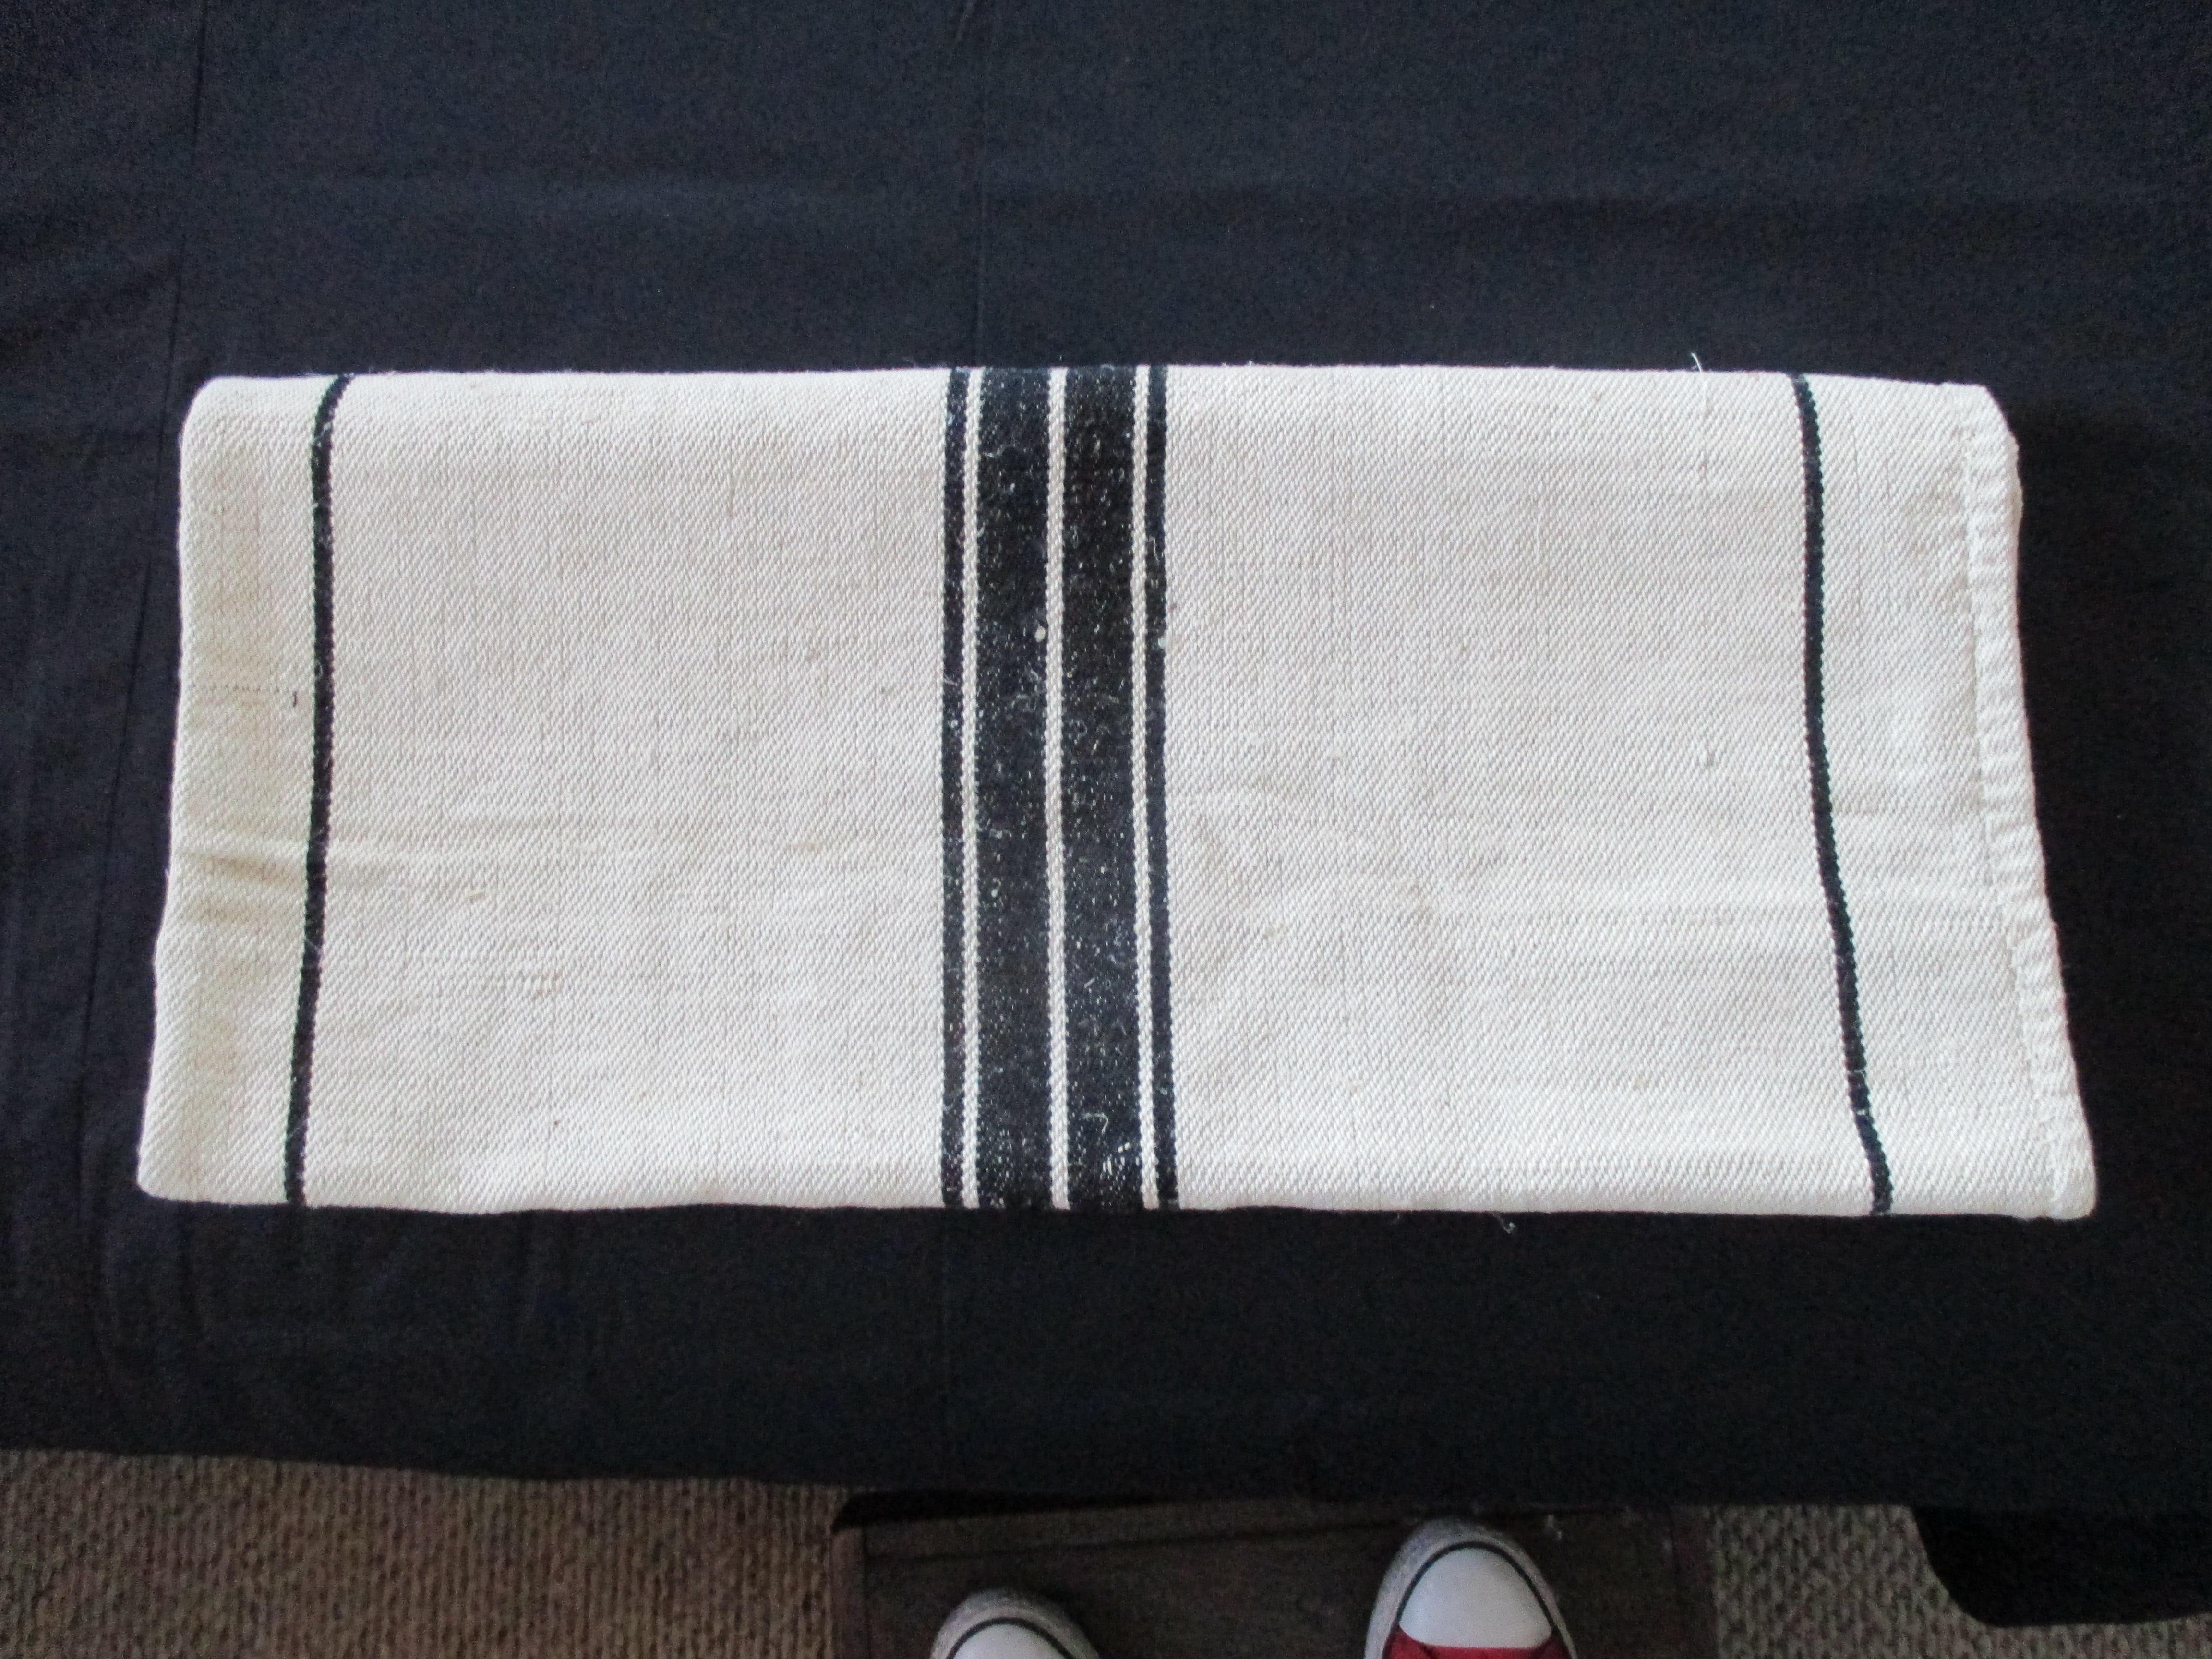 Antique French grain sack with black and natural stripes
Ideal for pillows and upholstery.
Size: 41